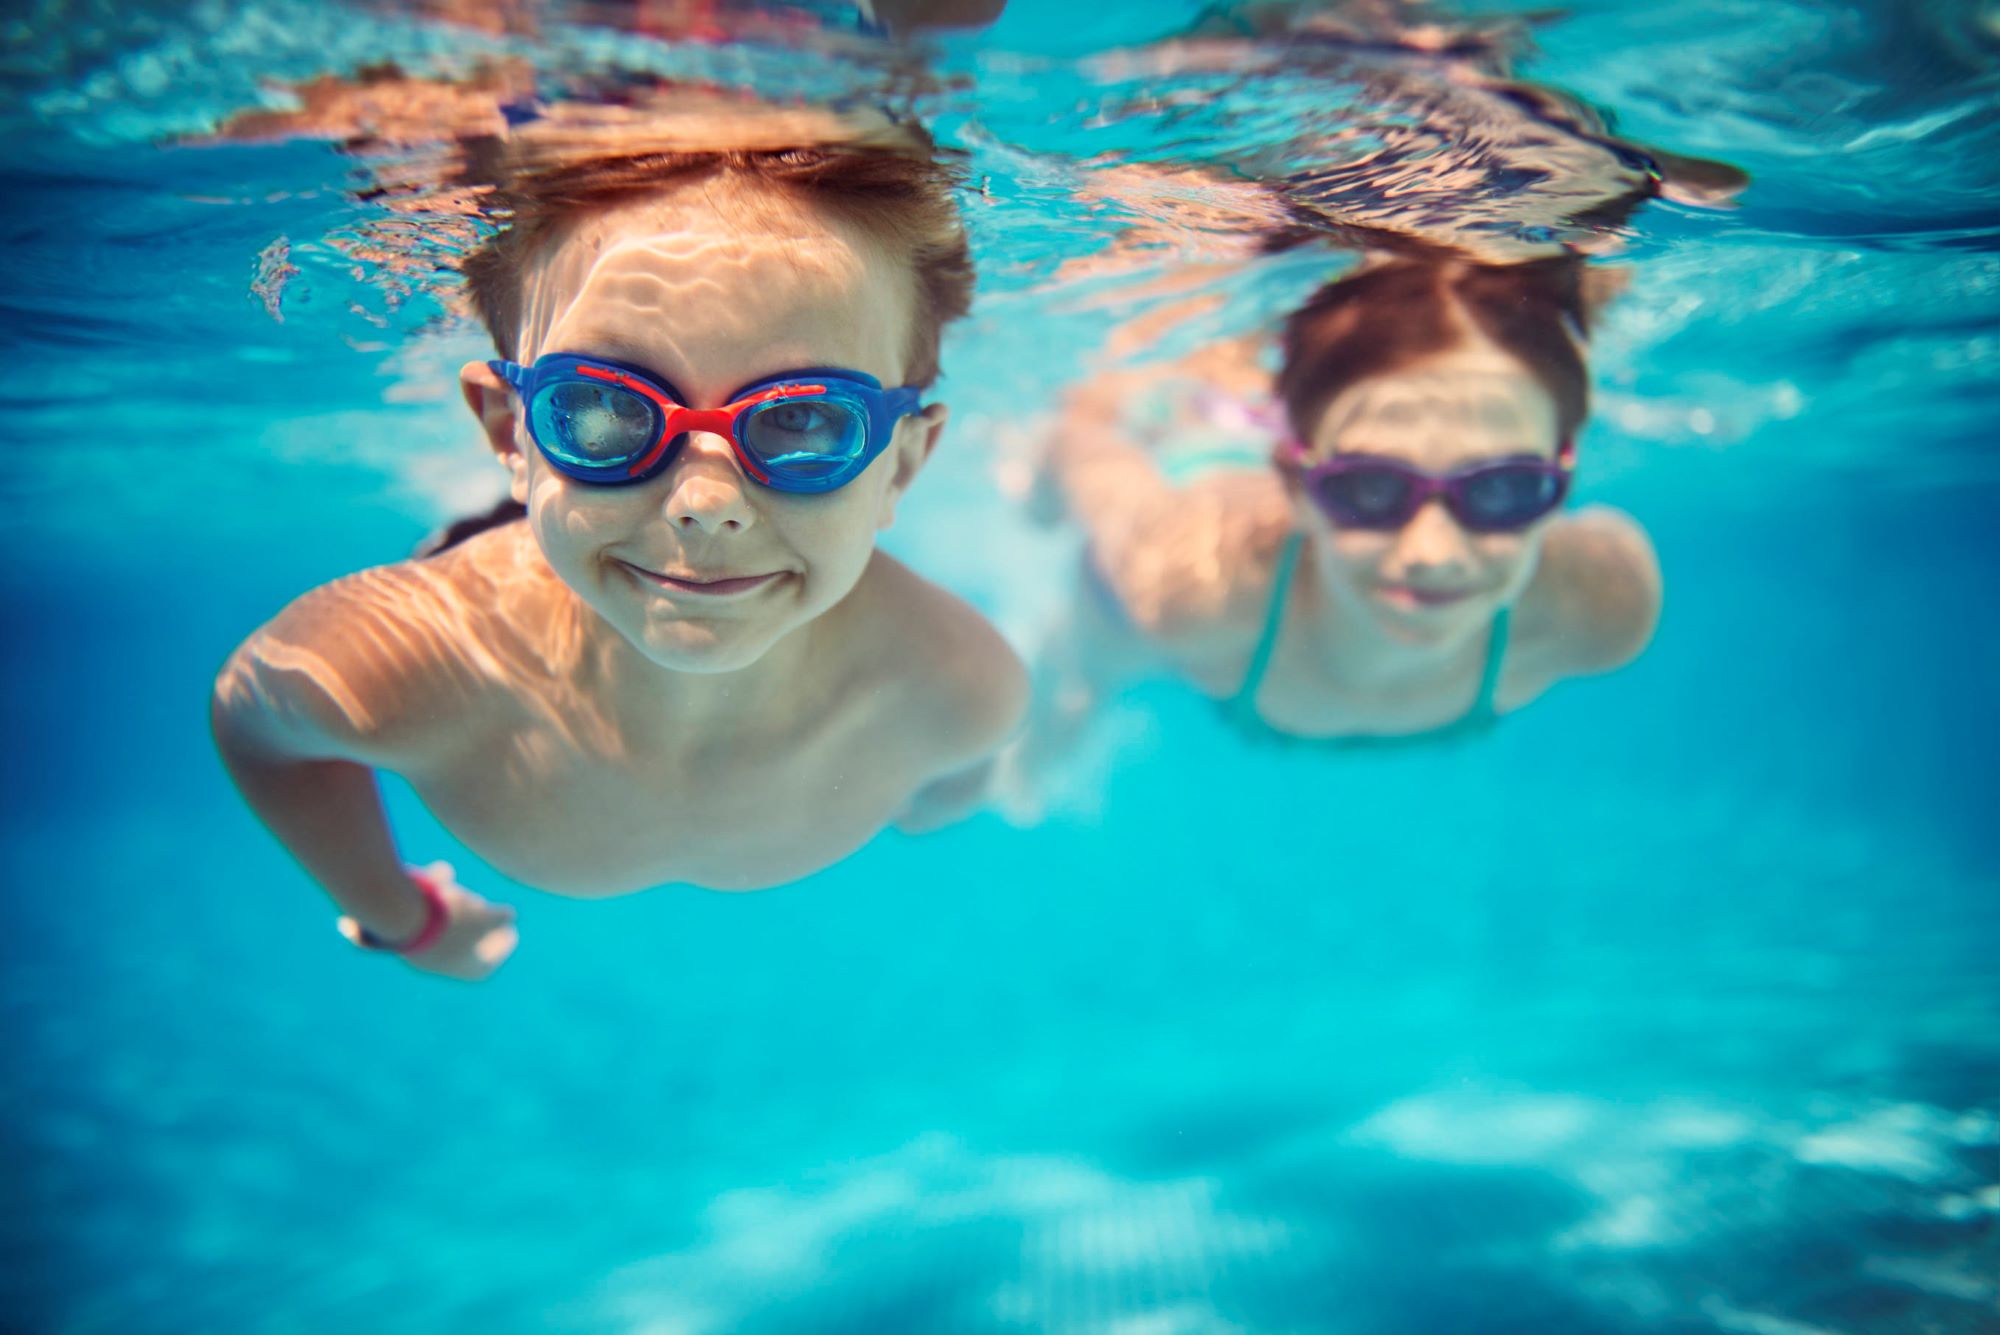 Two children swimming underwater in a pool